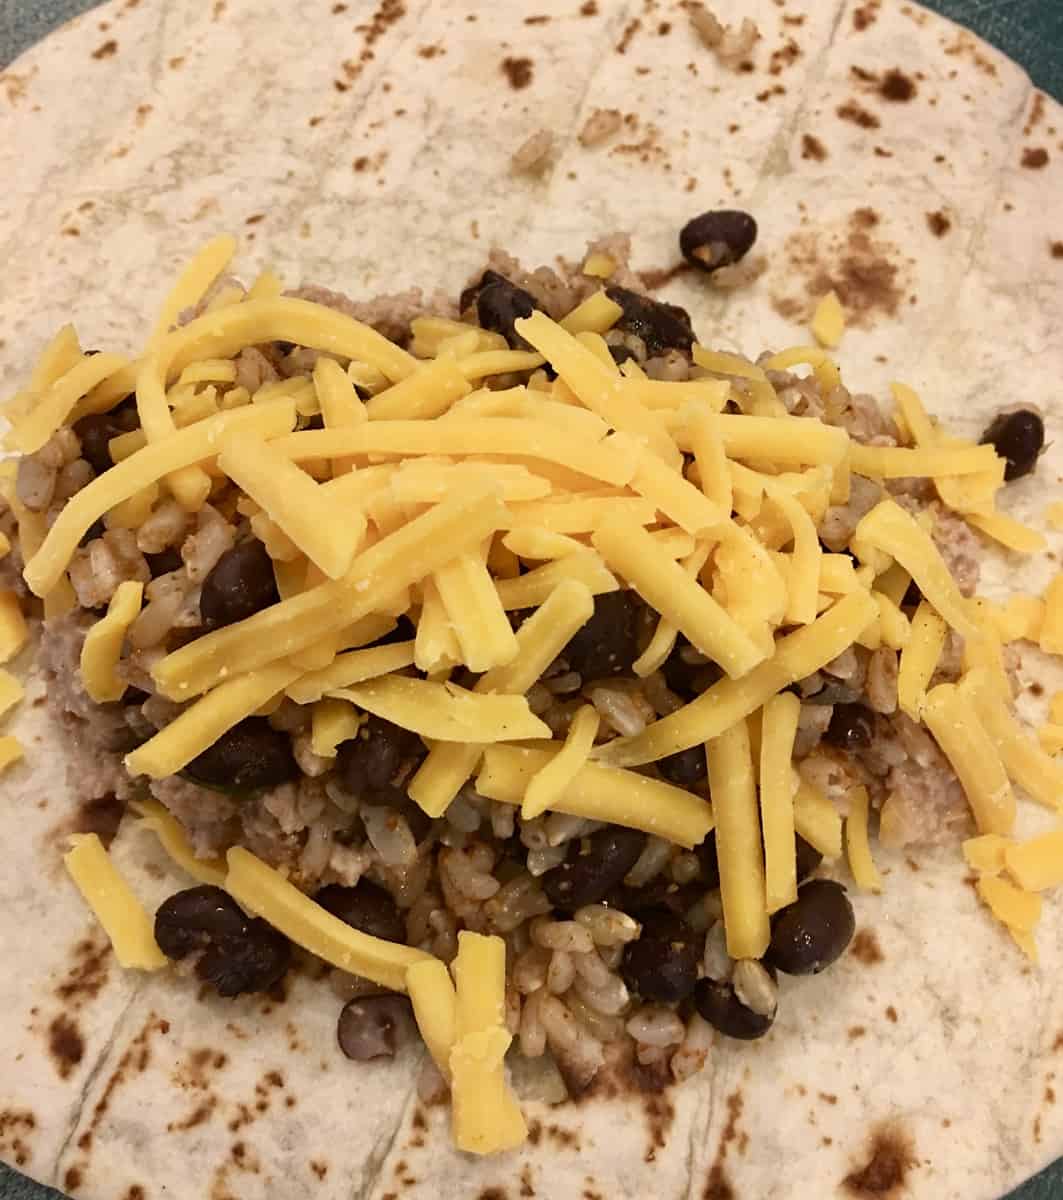 mixture placed in the middle of the tortilla. 